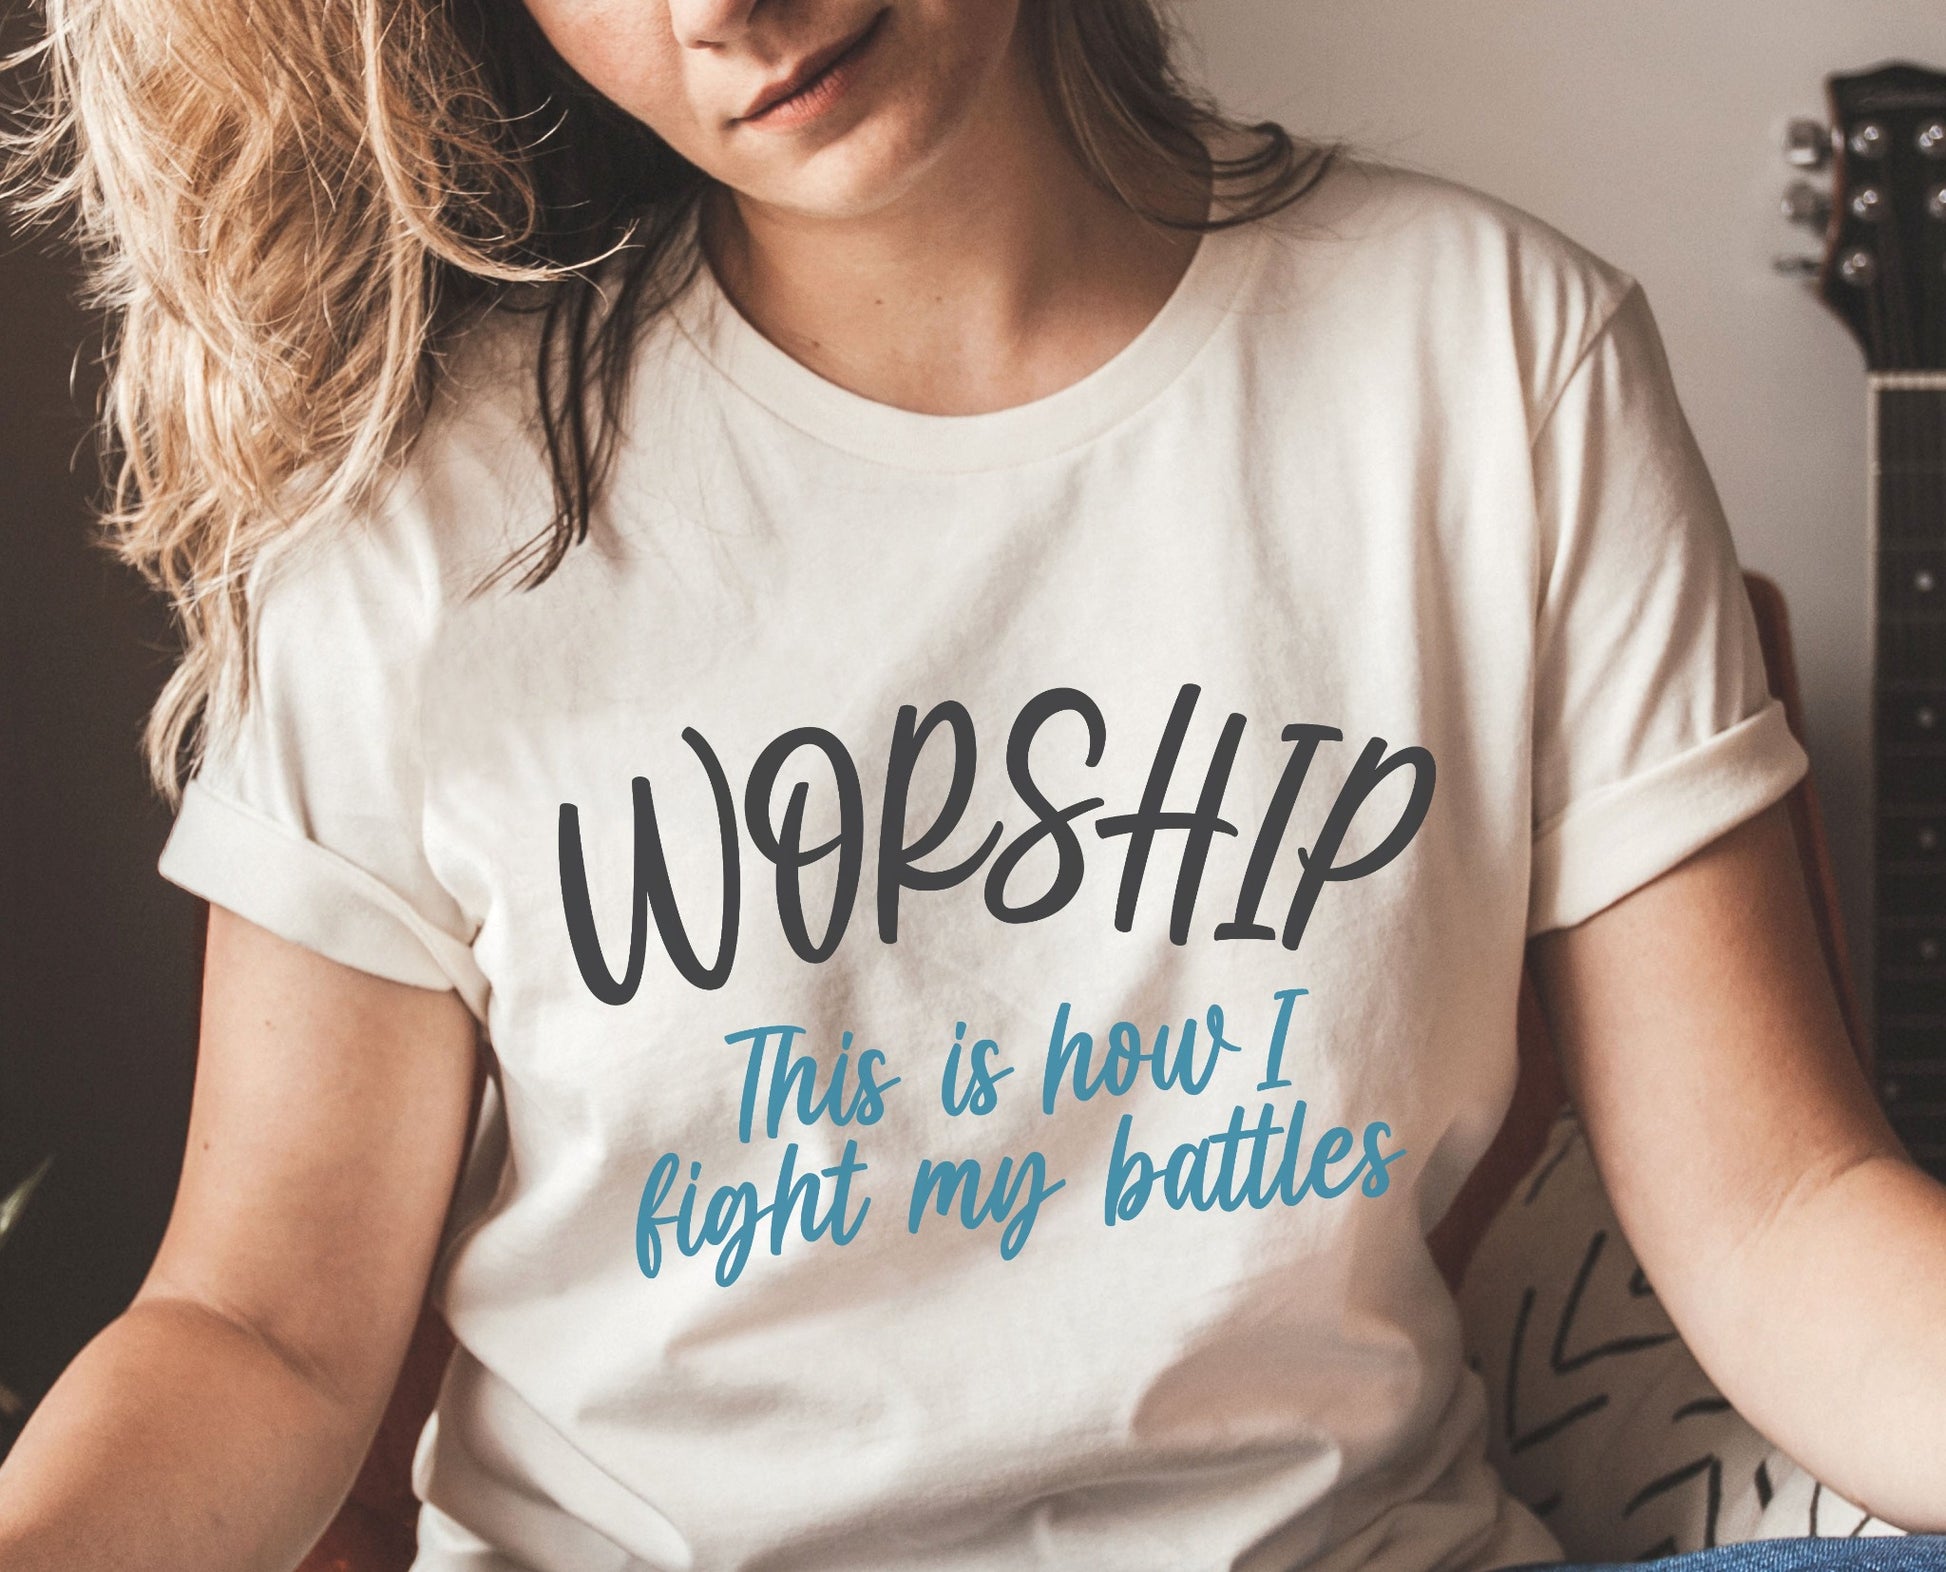 Worship This Is How I Fight My Battles Christian aesthetic t-shirt design printed on soft cream tee for women, great gift for worship leaders